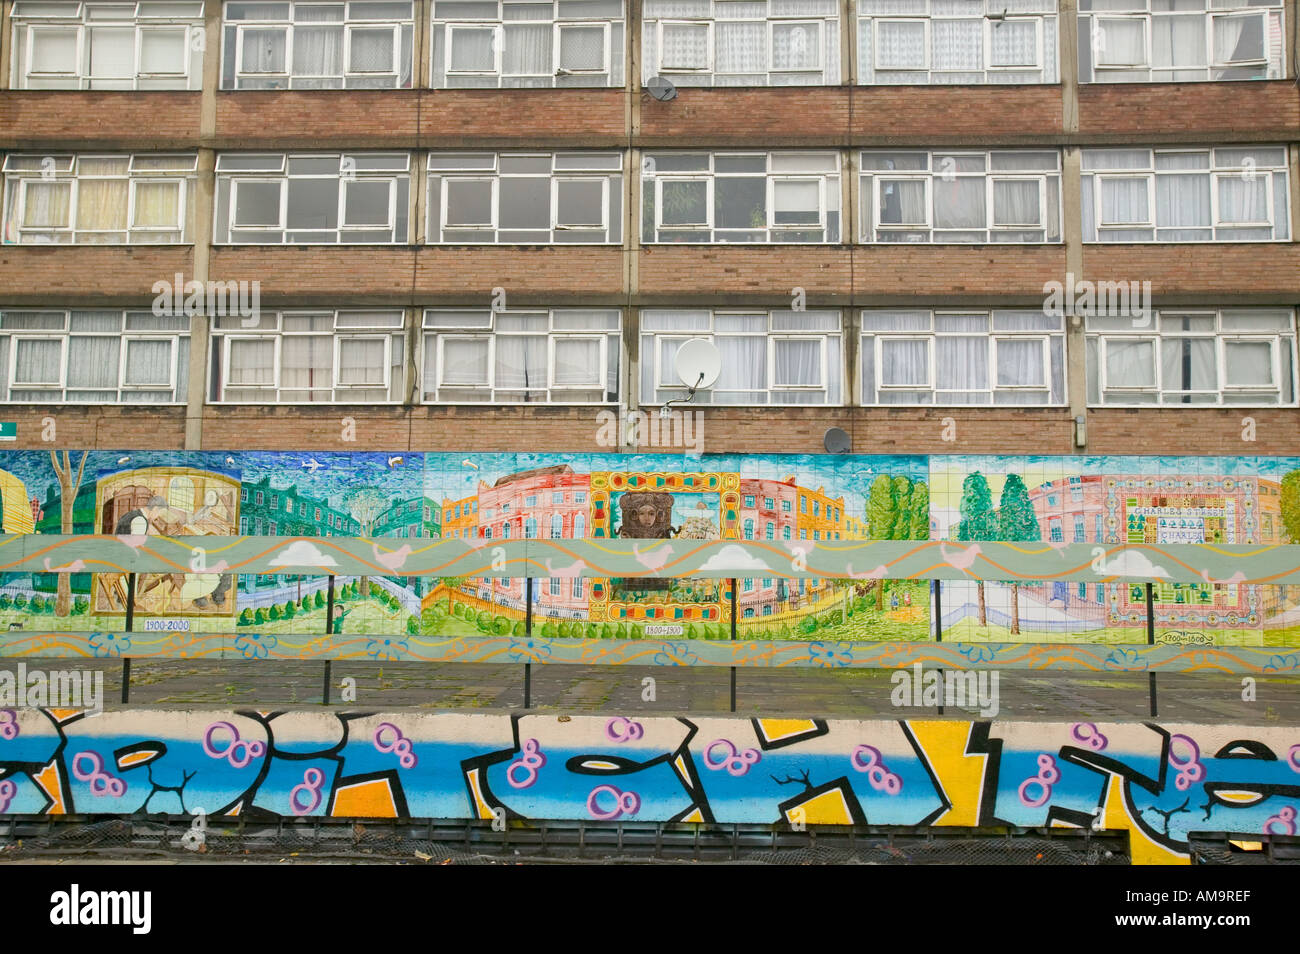 murals painted on run down council flats in the Borough of Hackney London Stock Photo